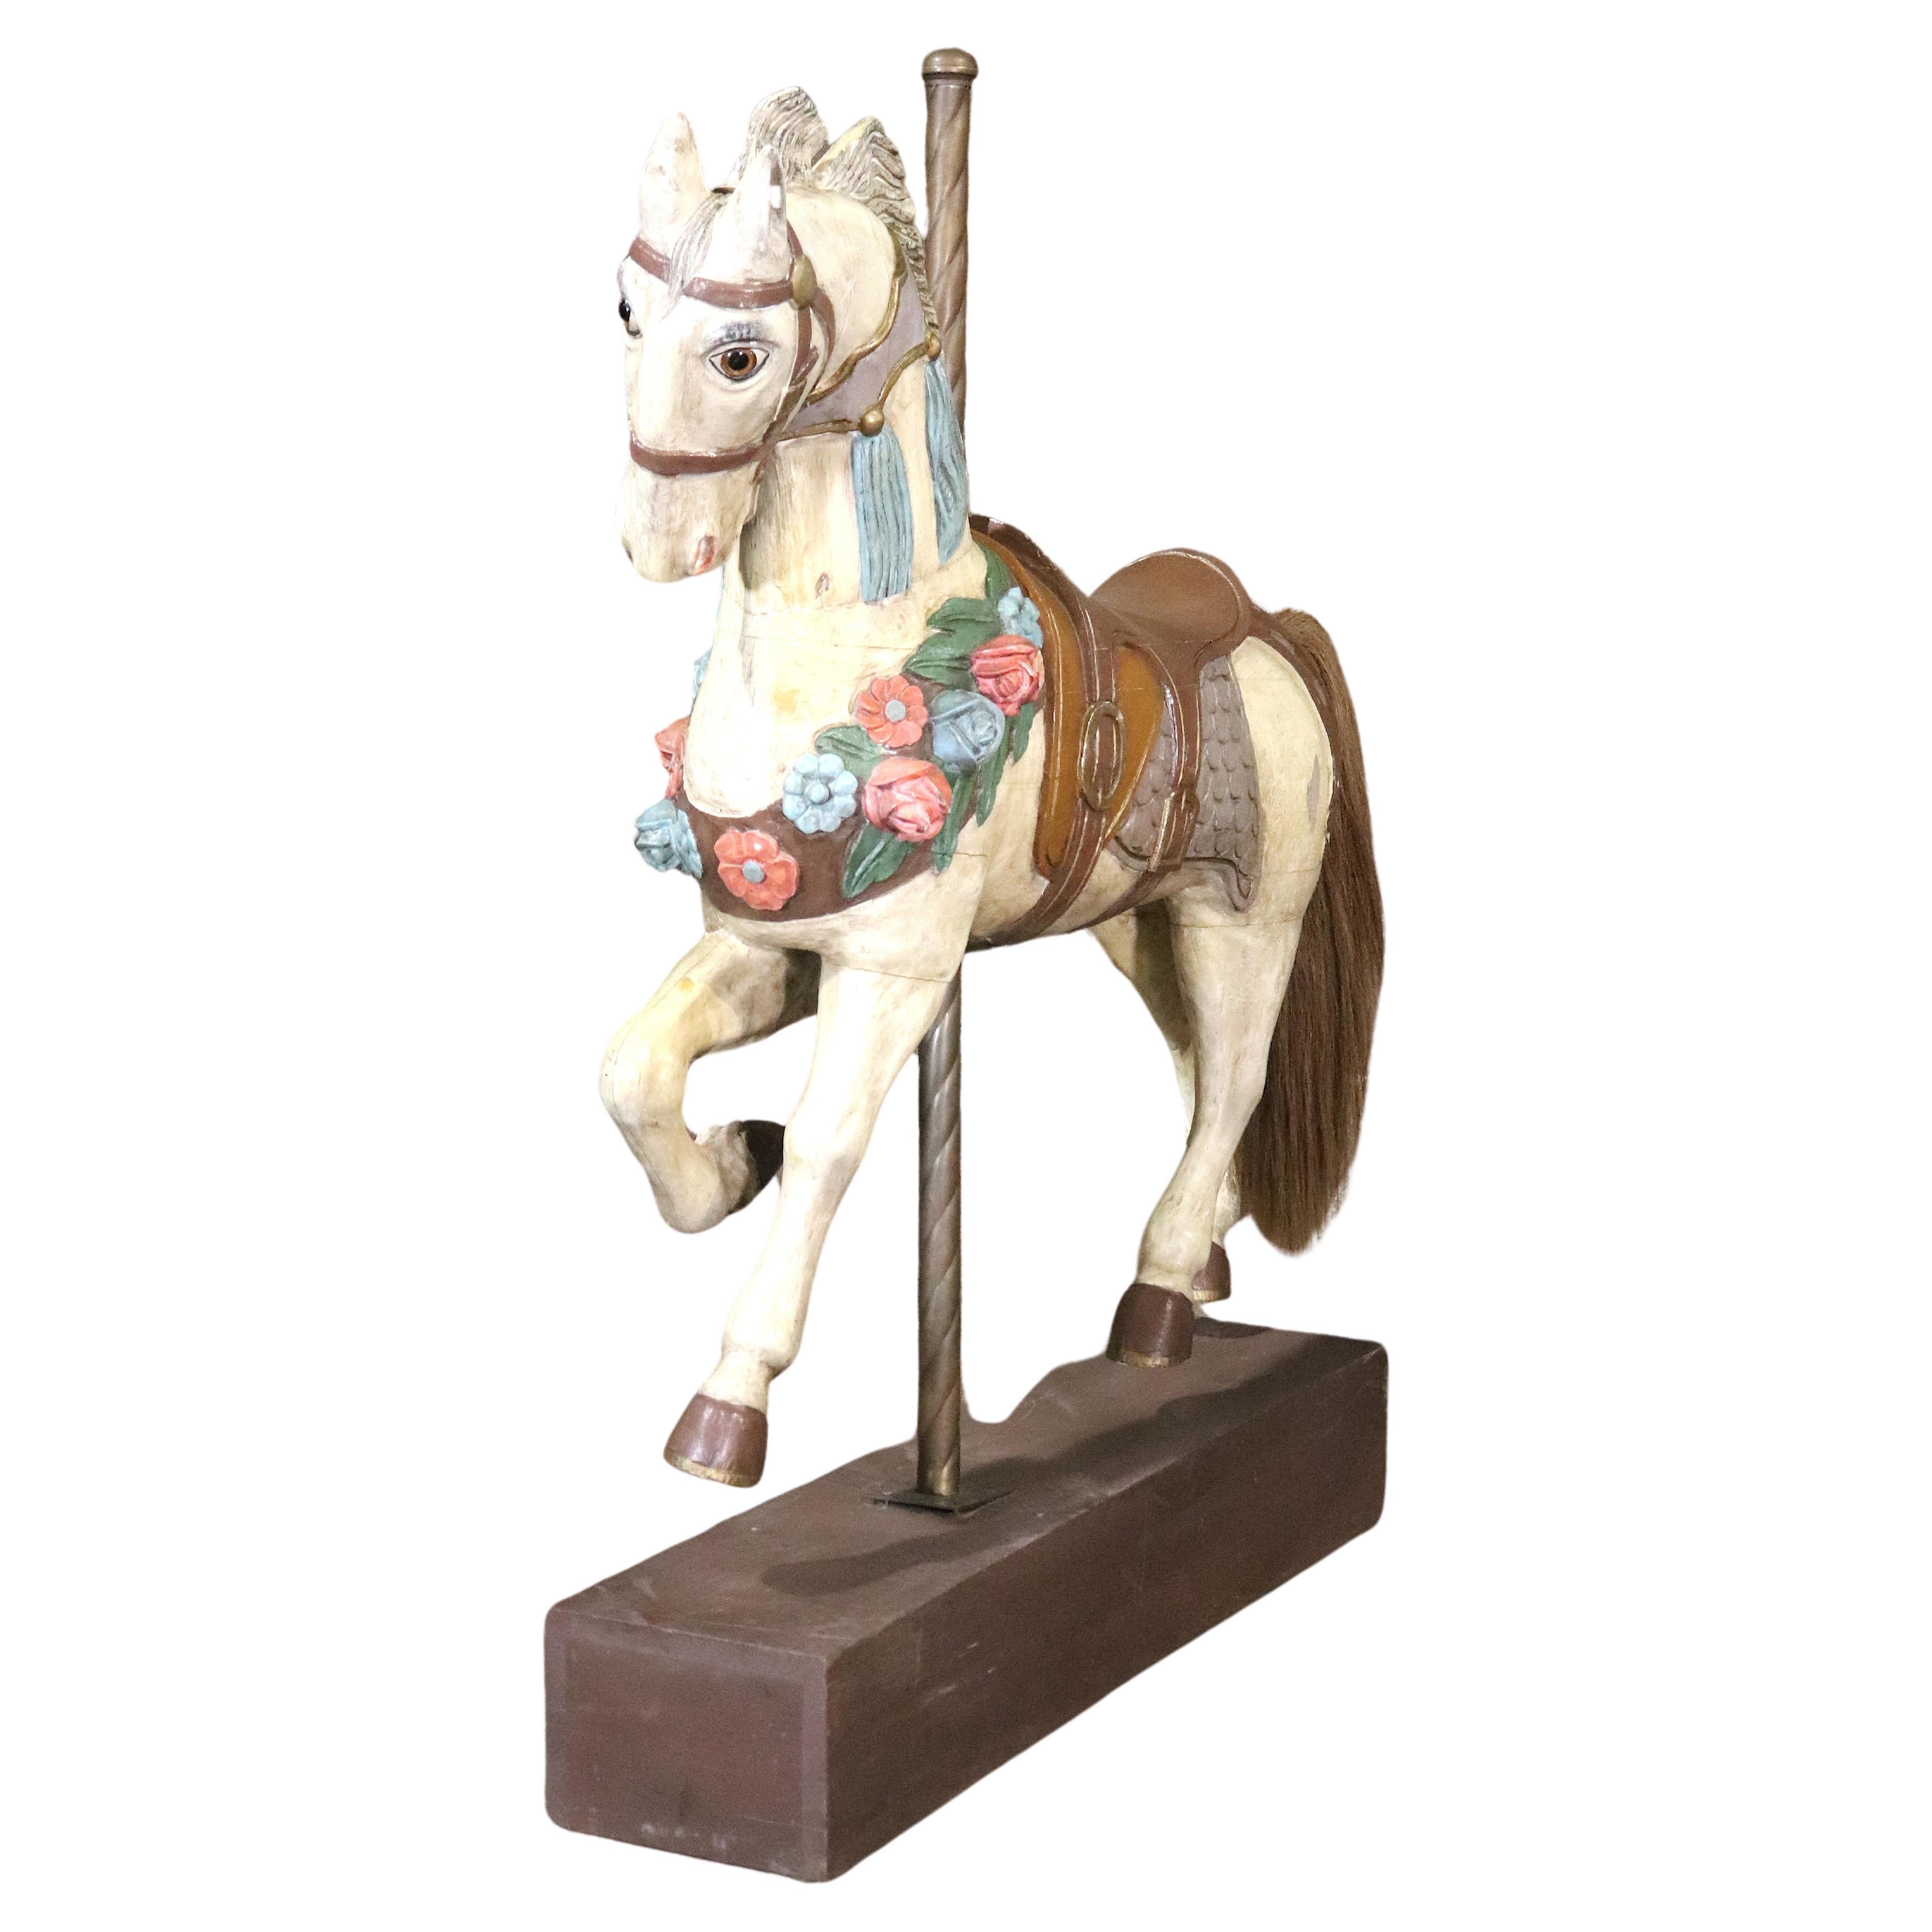 Antique Wooden Carousel Horse For Sale